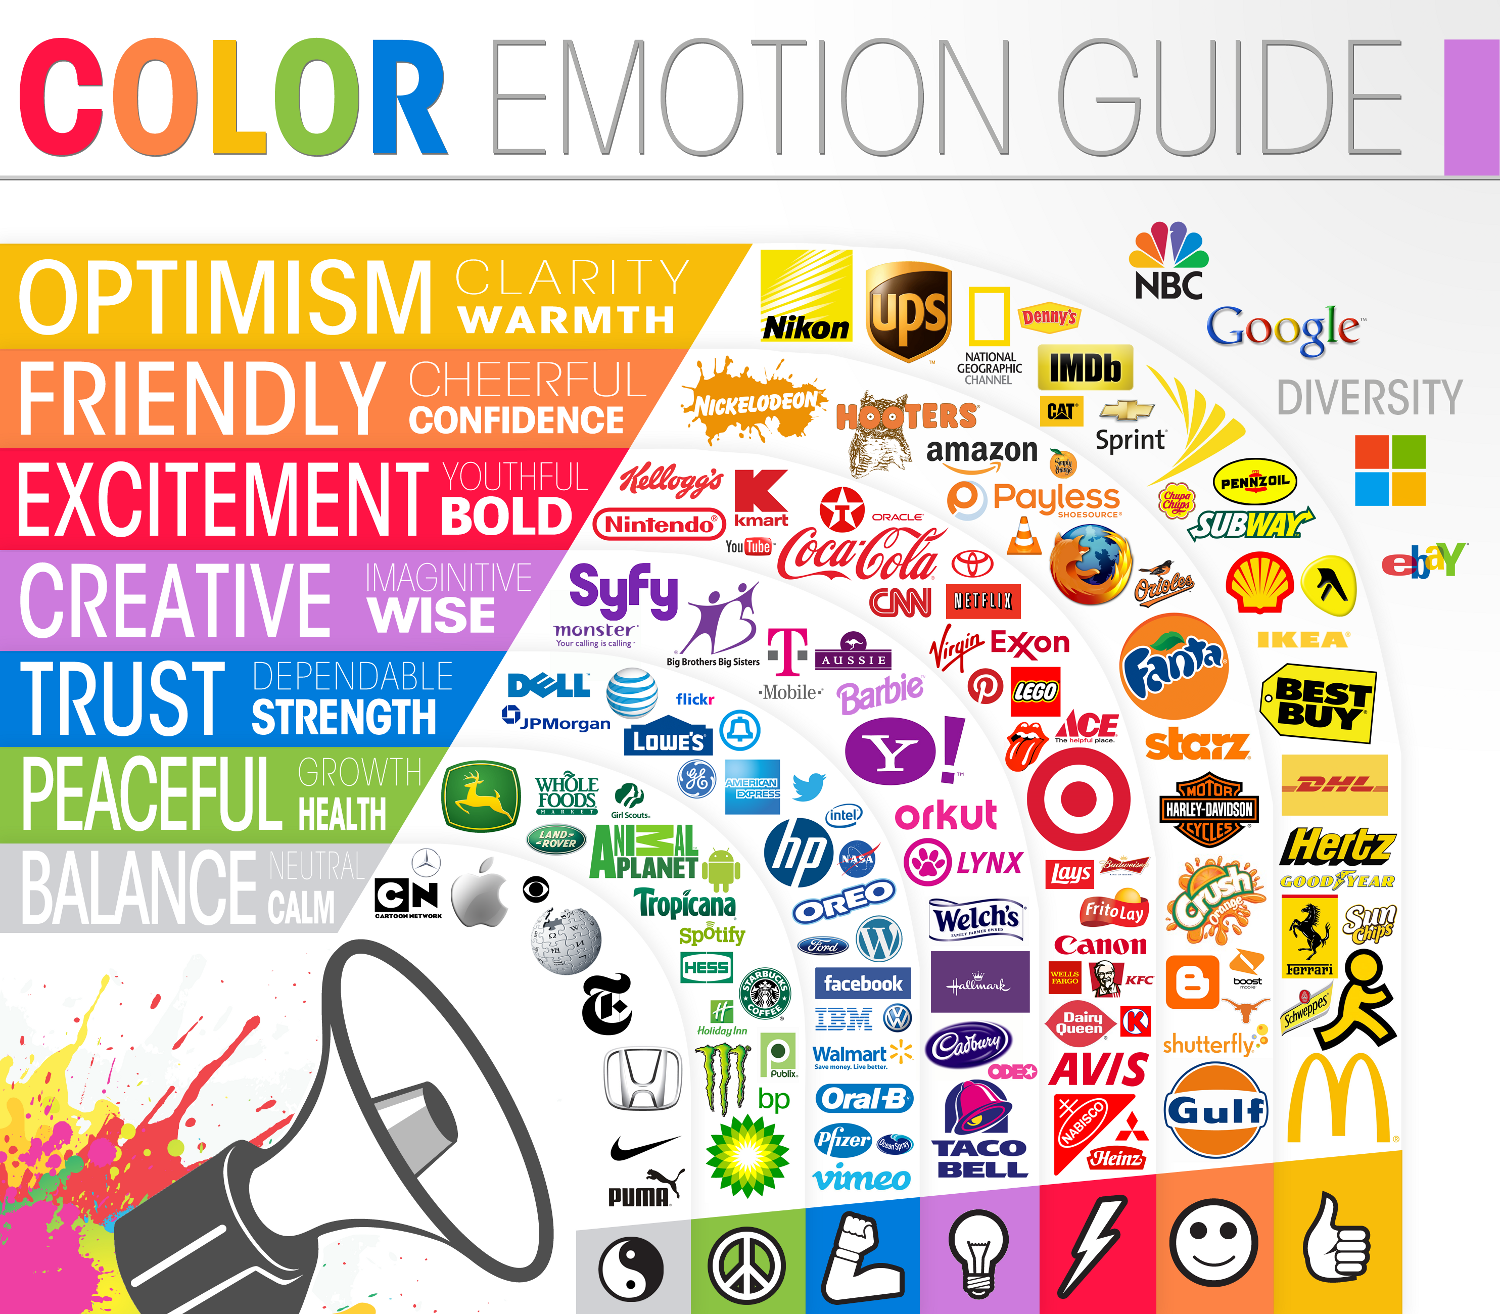 Colour and psychology